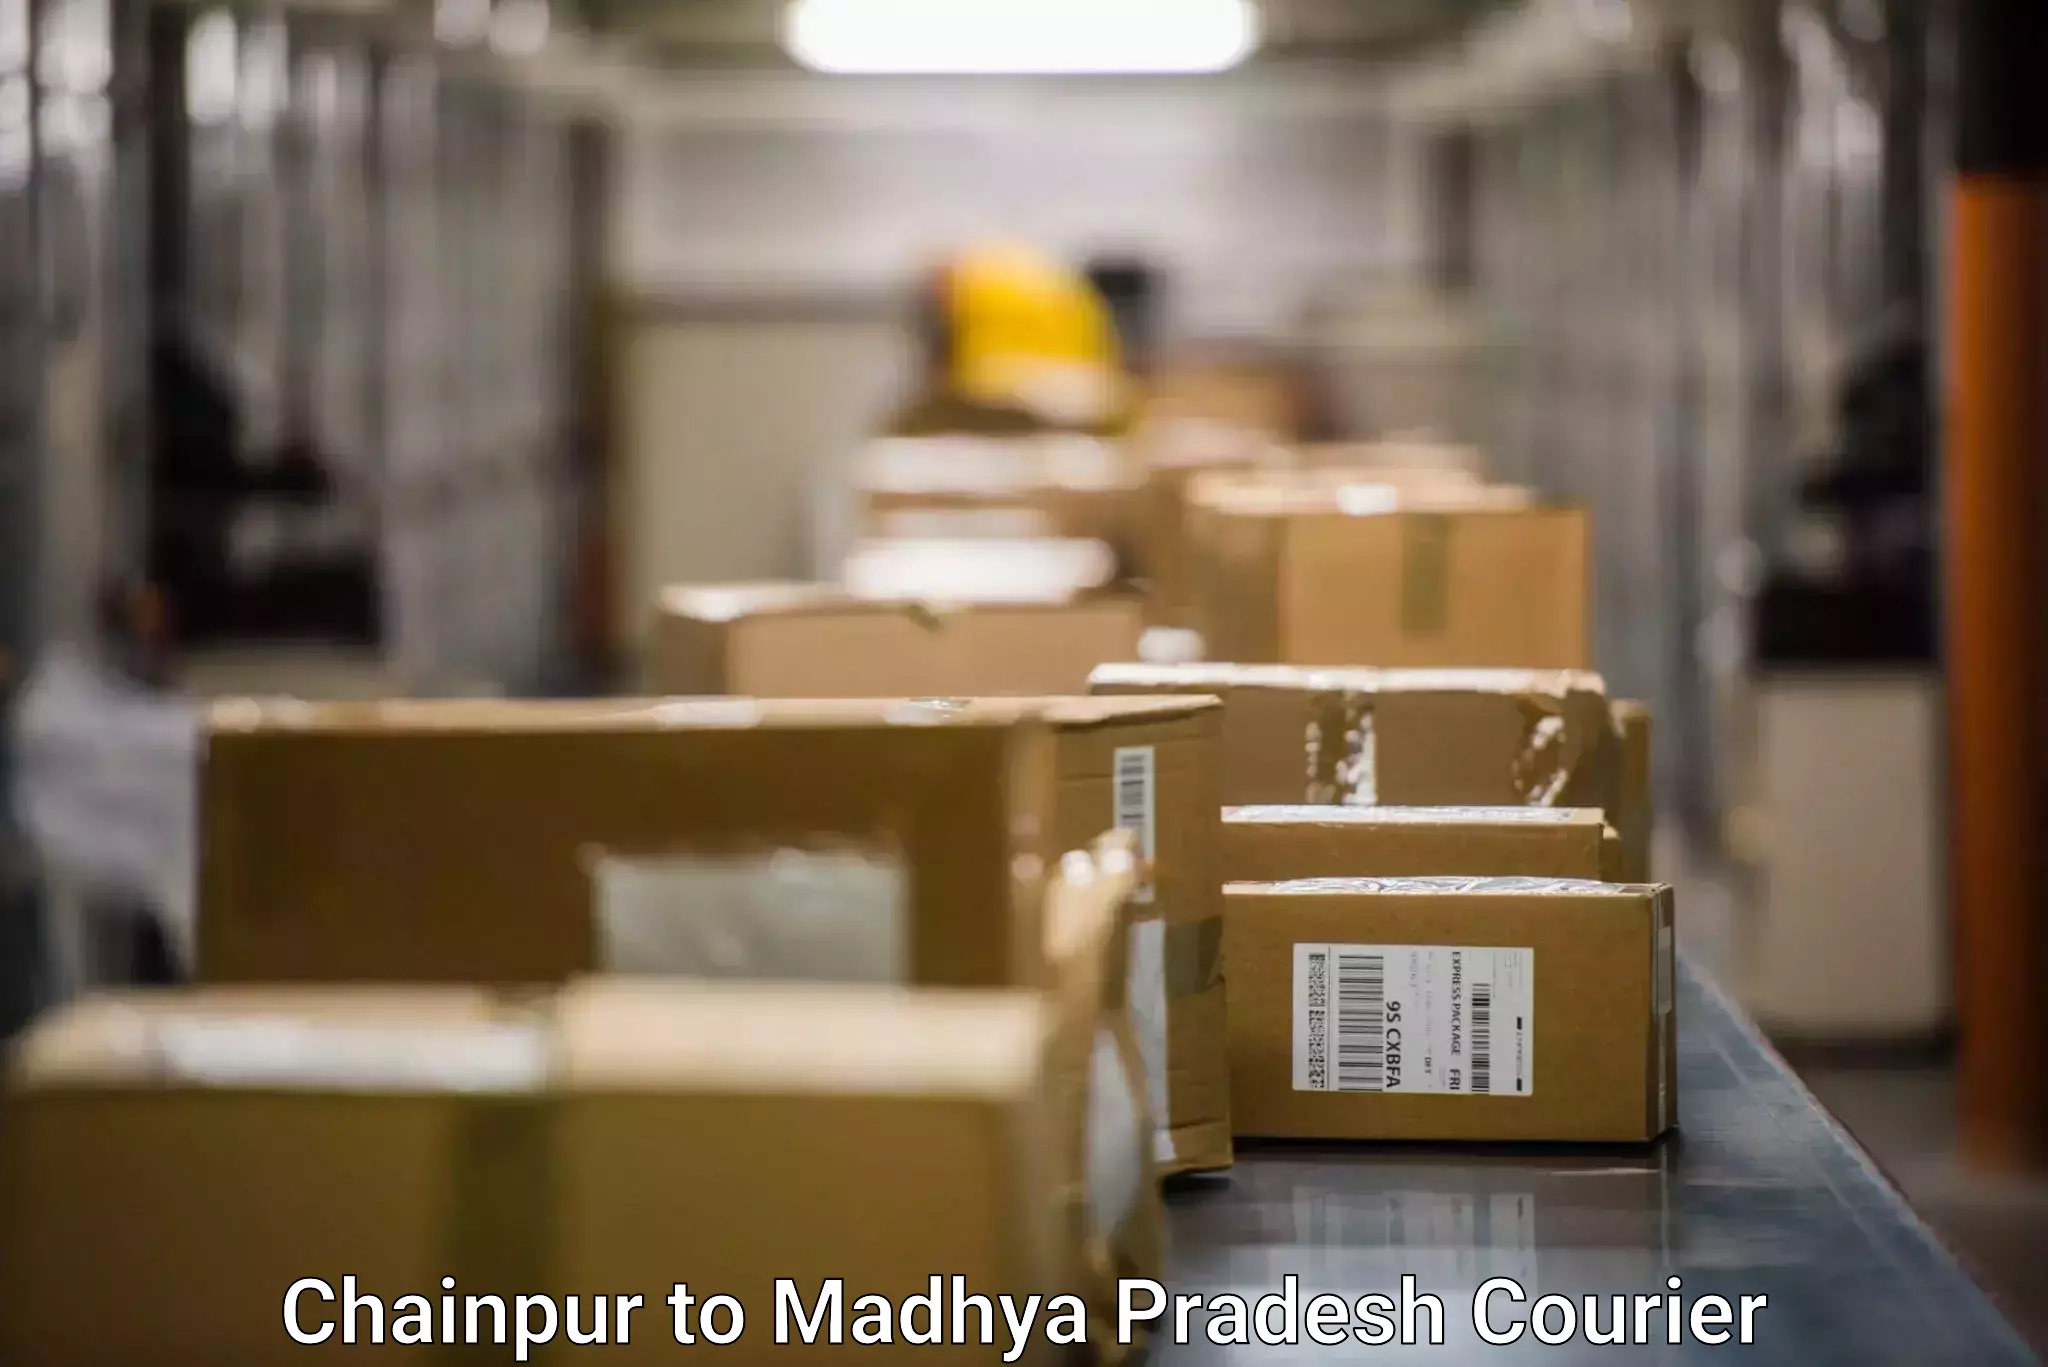 Express courier capabilities Chainpur to IIIT Bhopal